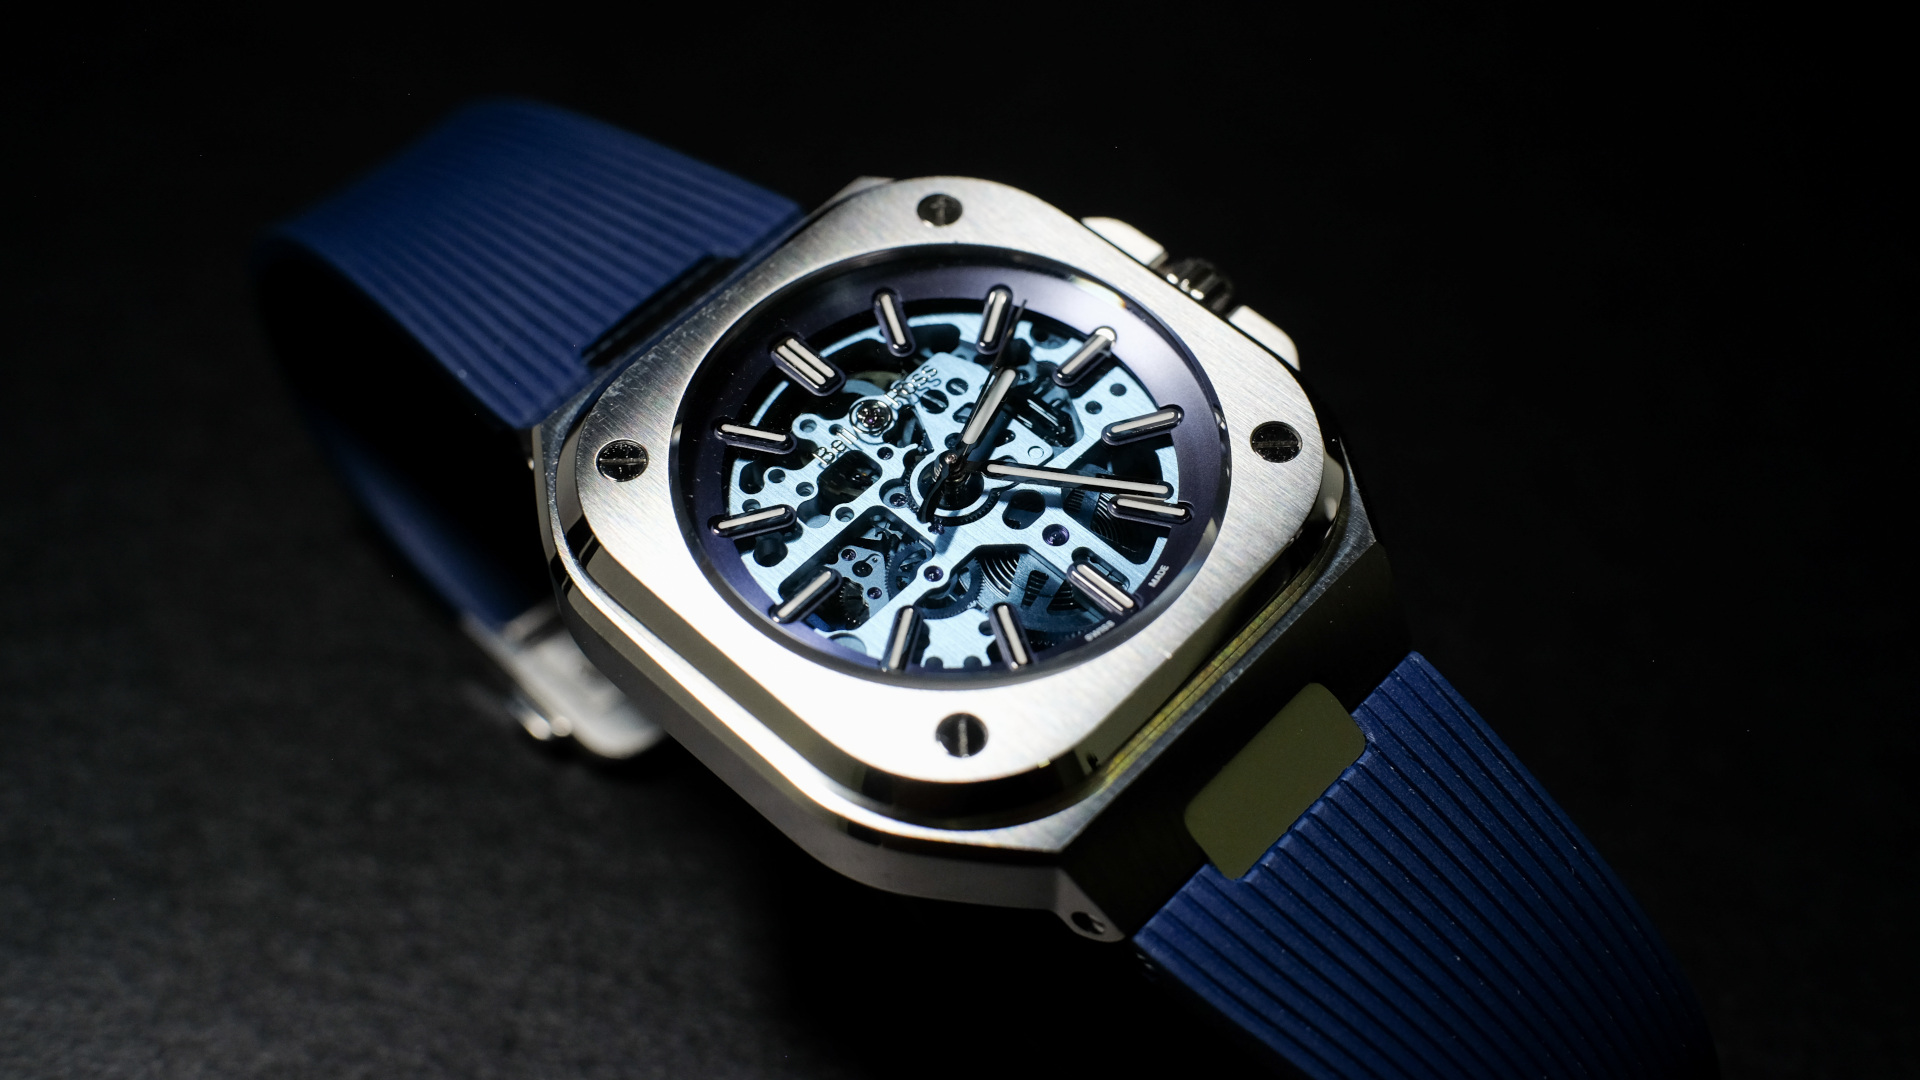 Bell & Ross BR 05 Skeleton Blue: When the steel sports watch takes on a more elegant form